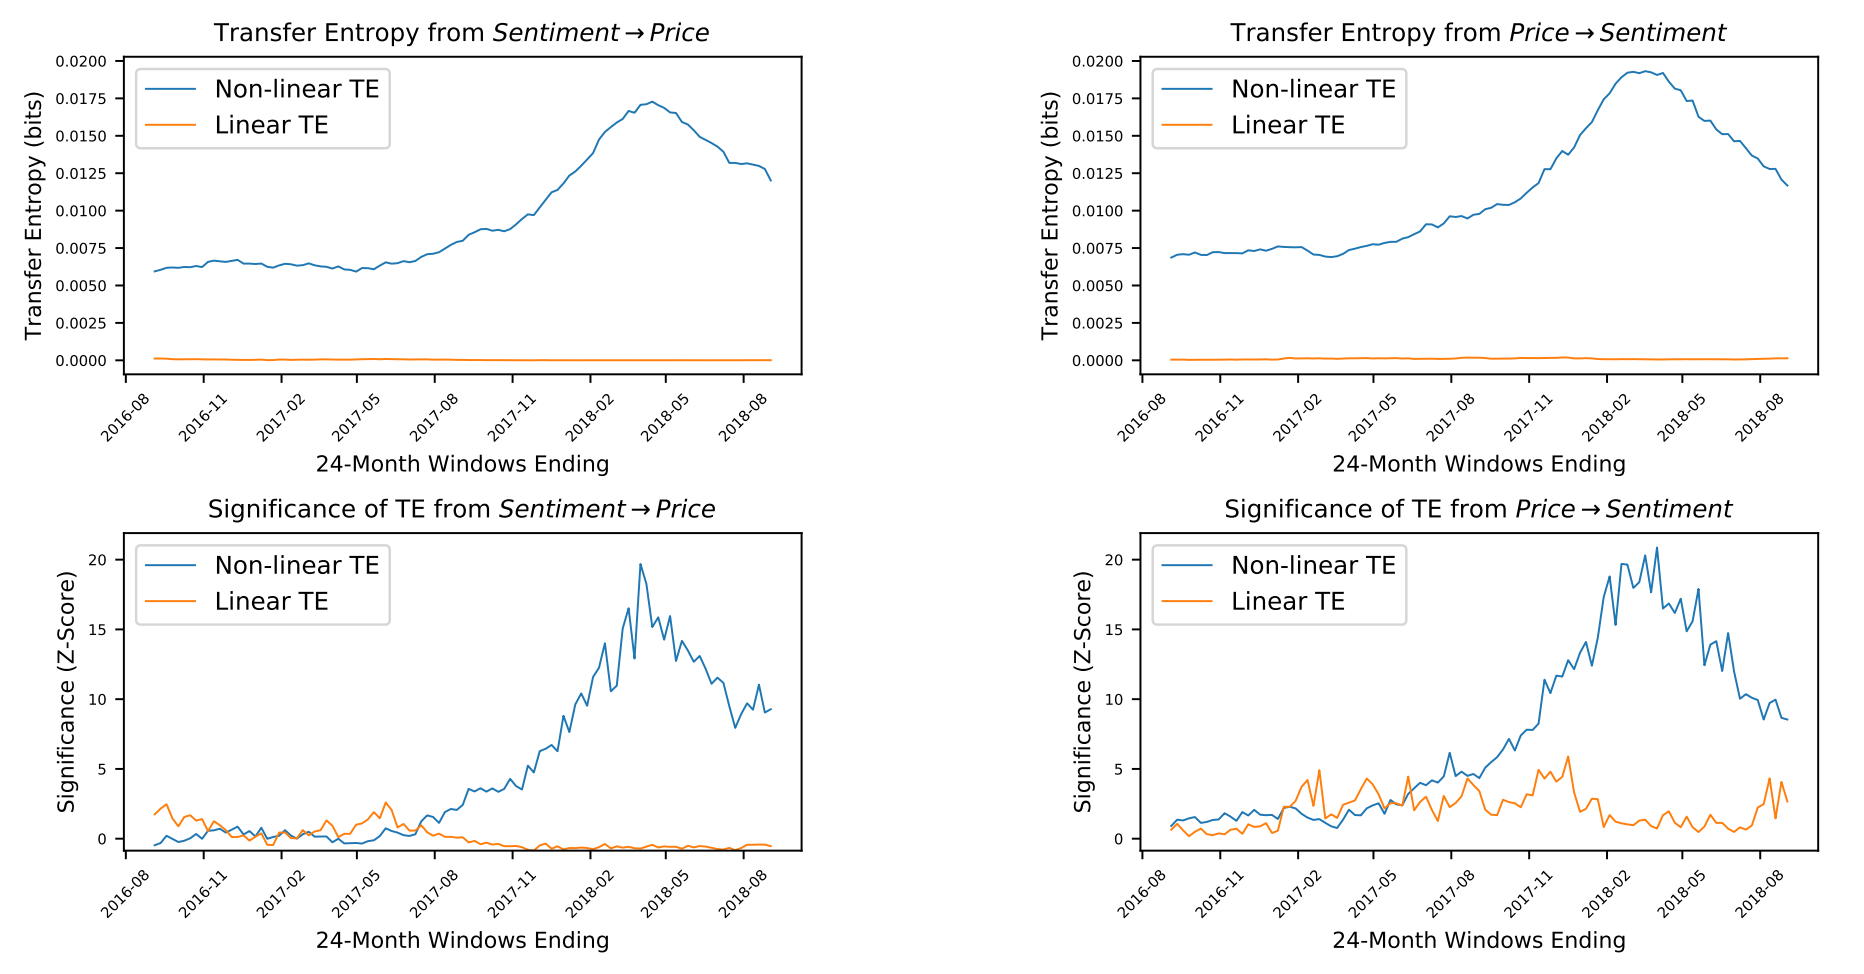 Evidence that BTC sentiment and price are causally coupled in both directions in a non-linear way. Non-linear TE is calculated by multidimensional histograms with 6 quantile bins per dimension. Z-scores, calculated over 50 shuffles, show a high level of significance, especially during 2017 and 2018, in both directions.